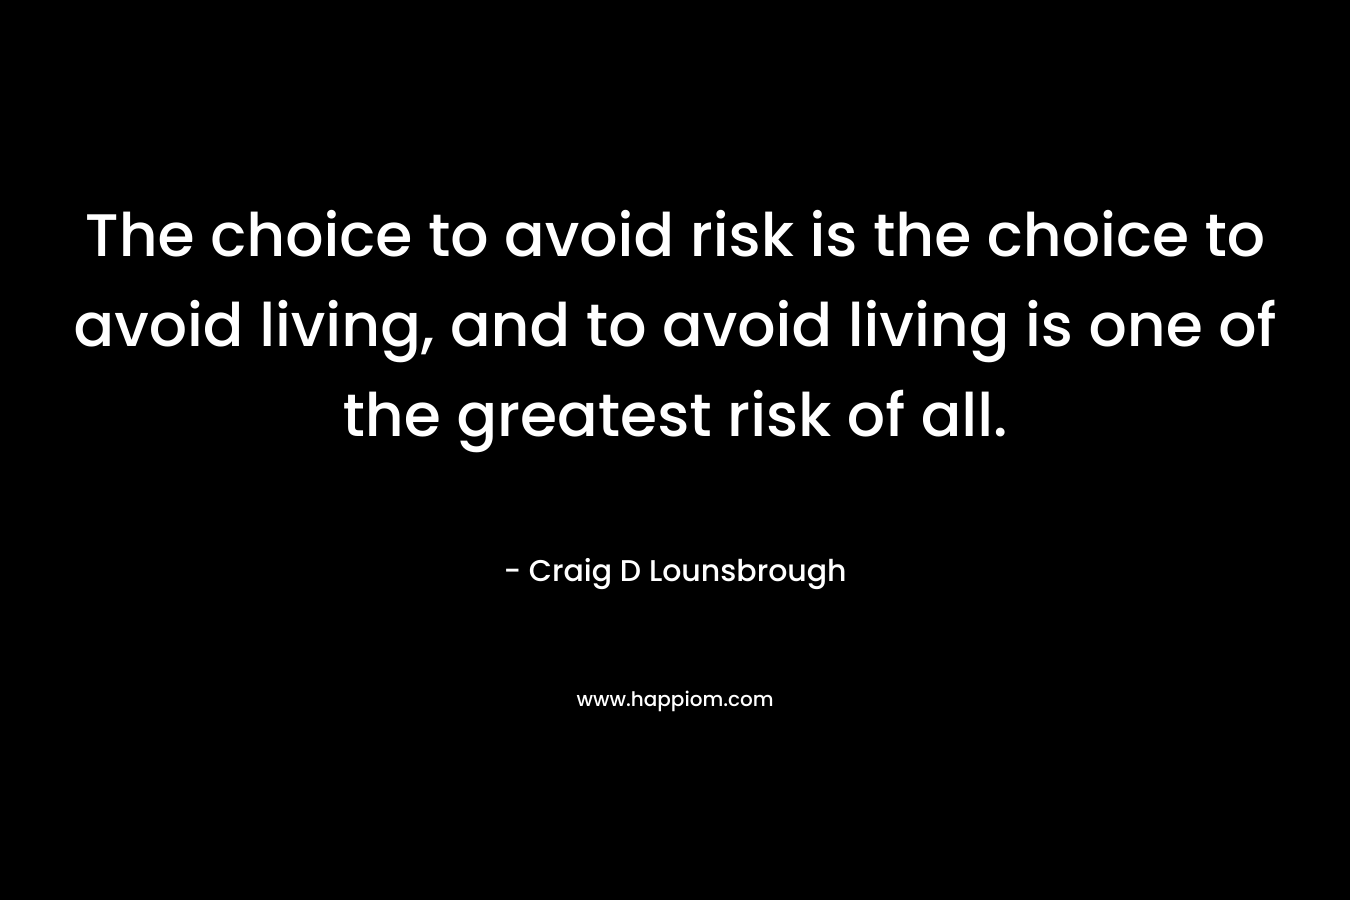 The choice to avoid risk is the choice to avoid living, and to avoid living is one of the greatest risk of all.